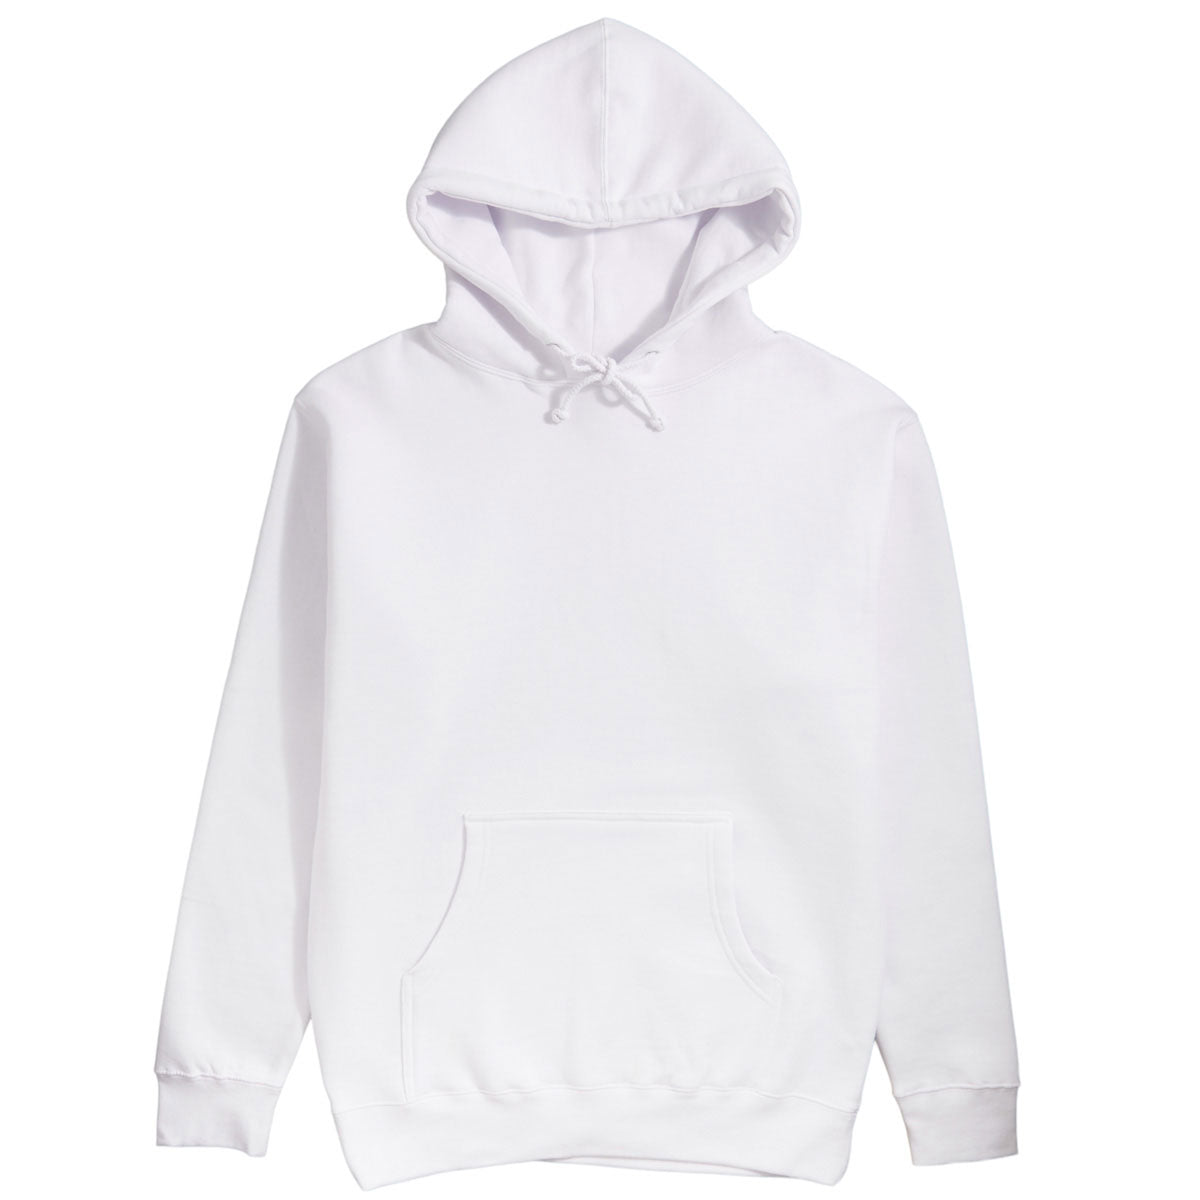 Lucas Beaufort Color-Up Customs X Pullover Hoodie image 2